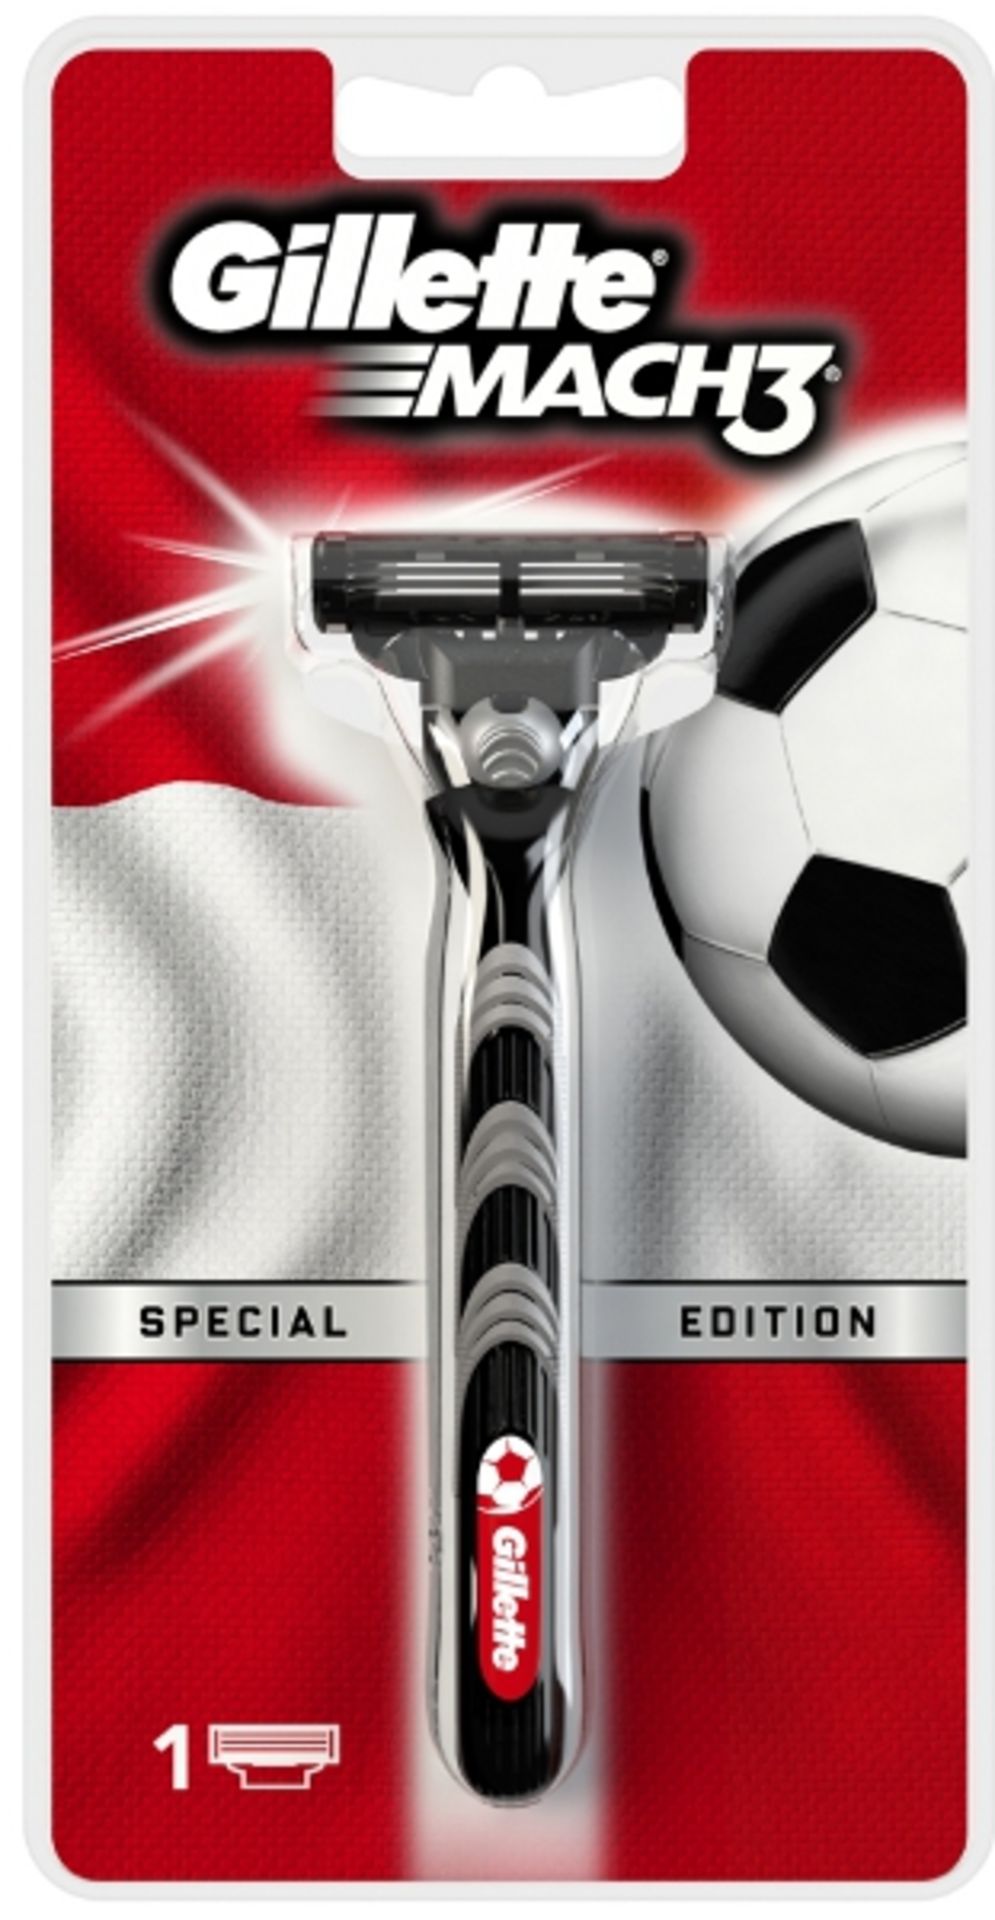 V *TRADE QTY* Brand New Gillette Mach3 Football Special Edition X 4 YOUR BID PRICE TO BE